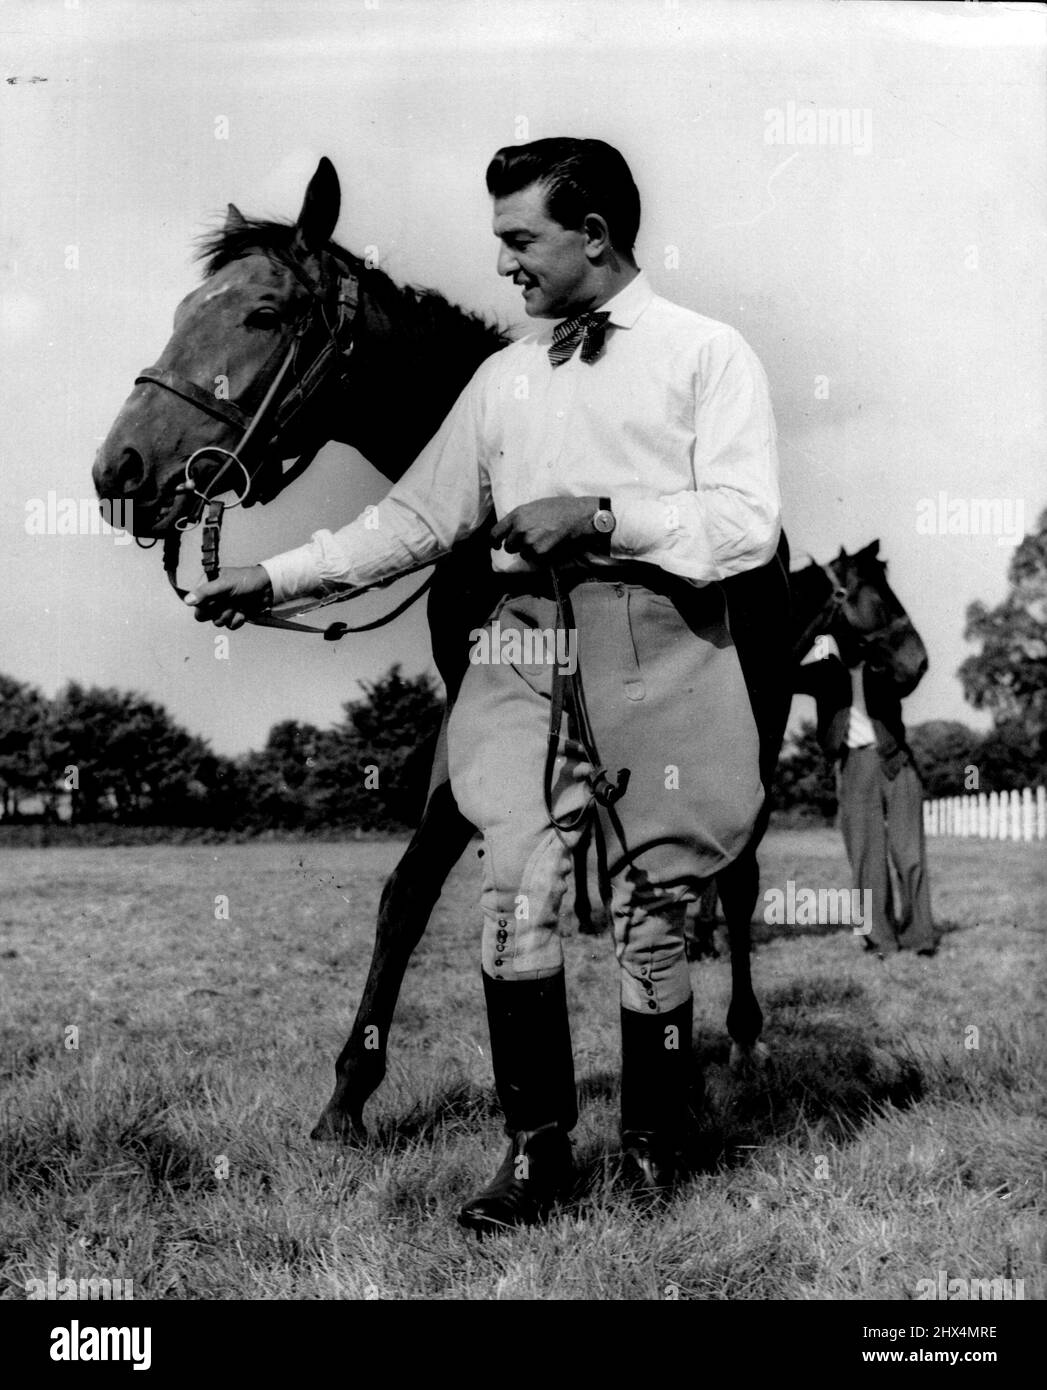 Sportsmen Raymond exercises a favourite horse, Raymond's Folly, which he hopes to race soon. Violent sports like skiing, wrestling, speed driving in open cars are his pastimes. Soon he expects to race Raymond's Folly (above). December 29, 1954. Stock Photo